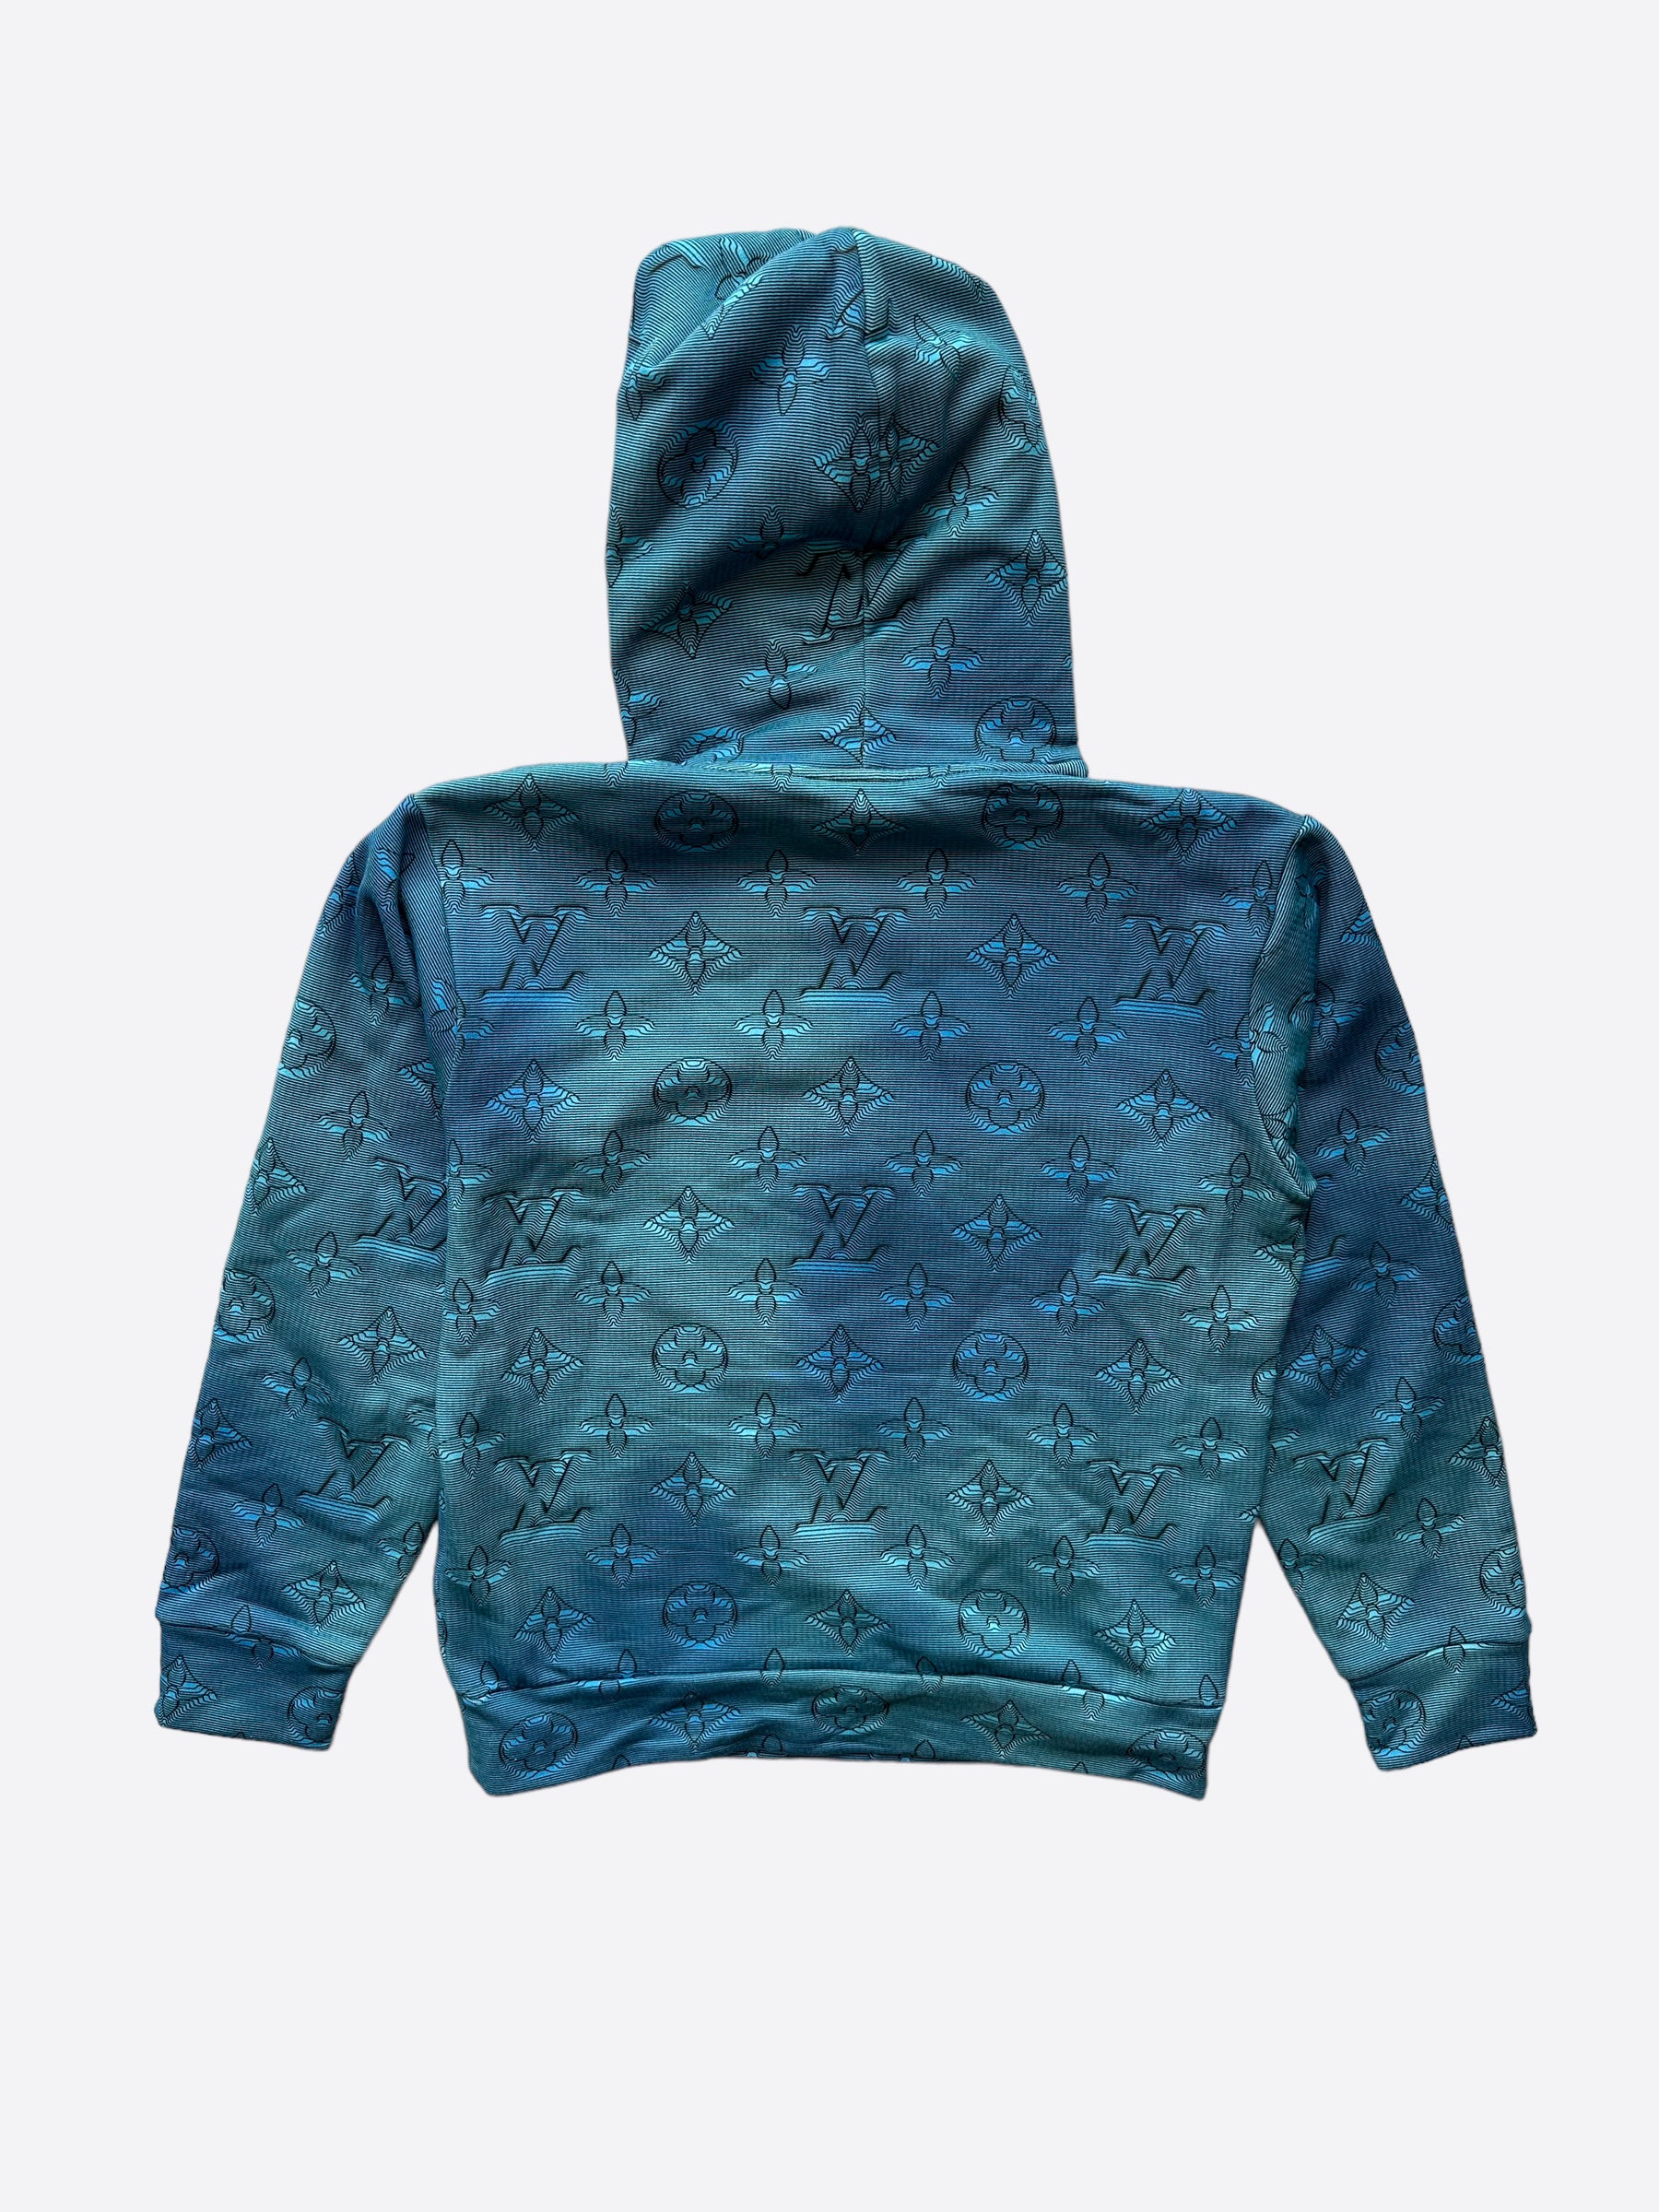 Guess The Price Of This Louis Vuitton 2054 Monogram Hoodie That Is